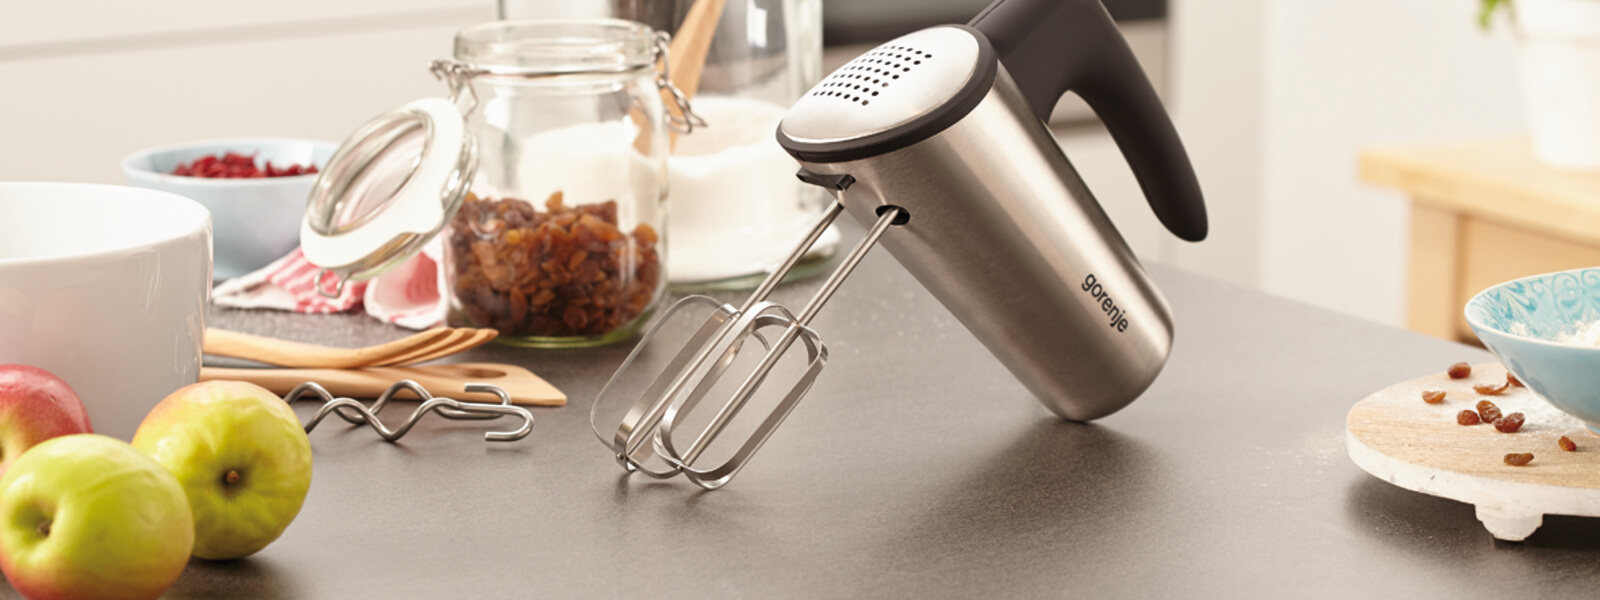  Hand Mixer Electric, 450W Kitchen Mixers with Scale